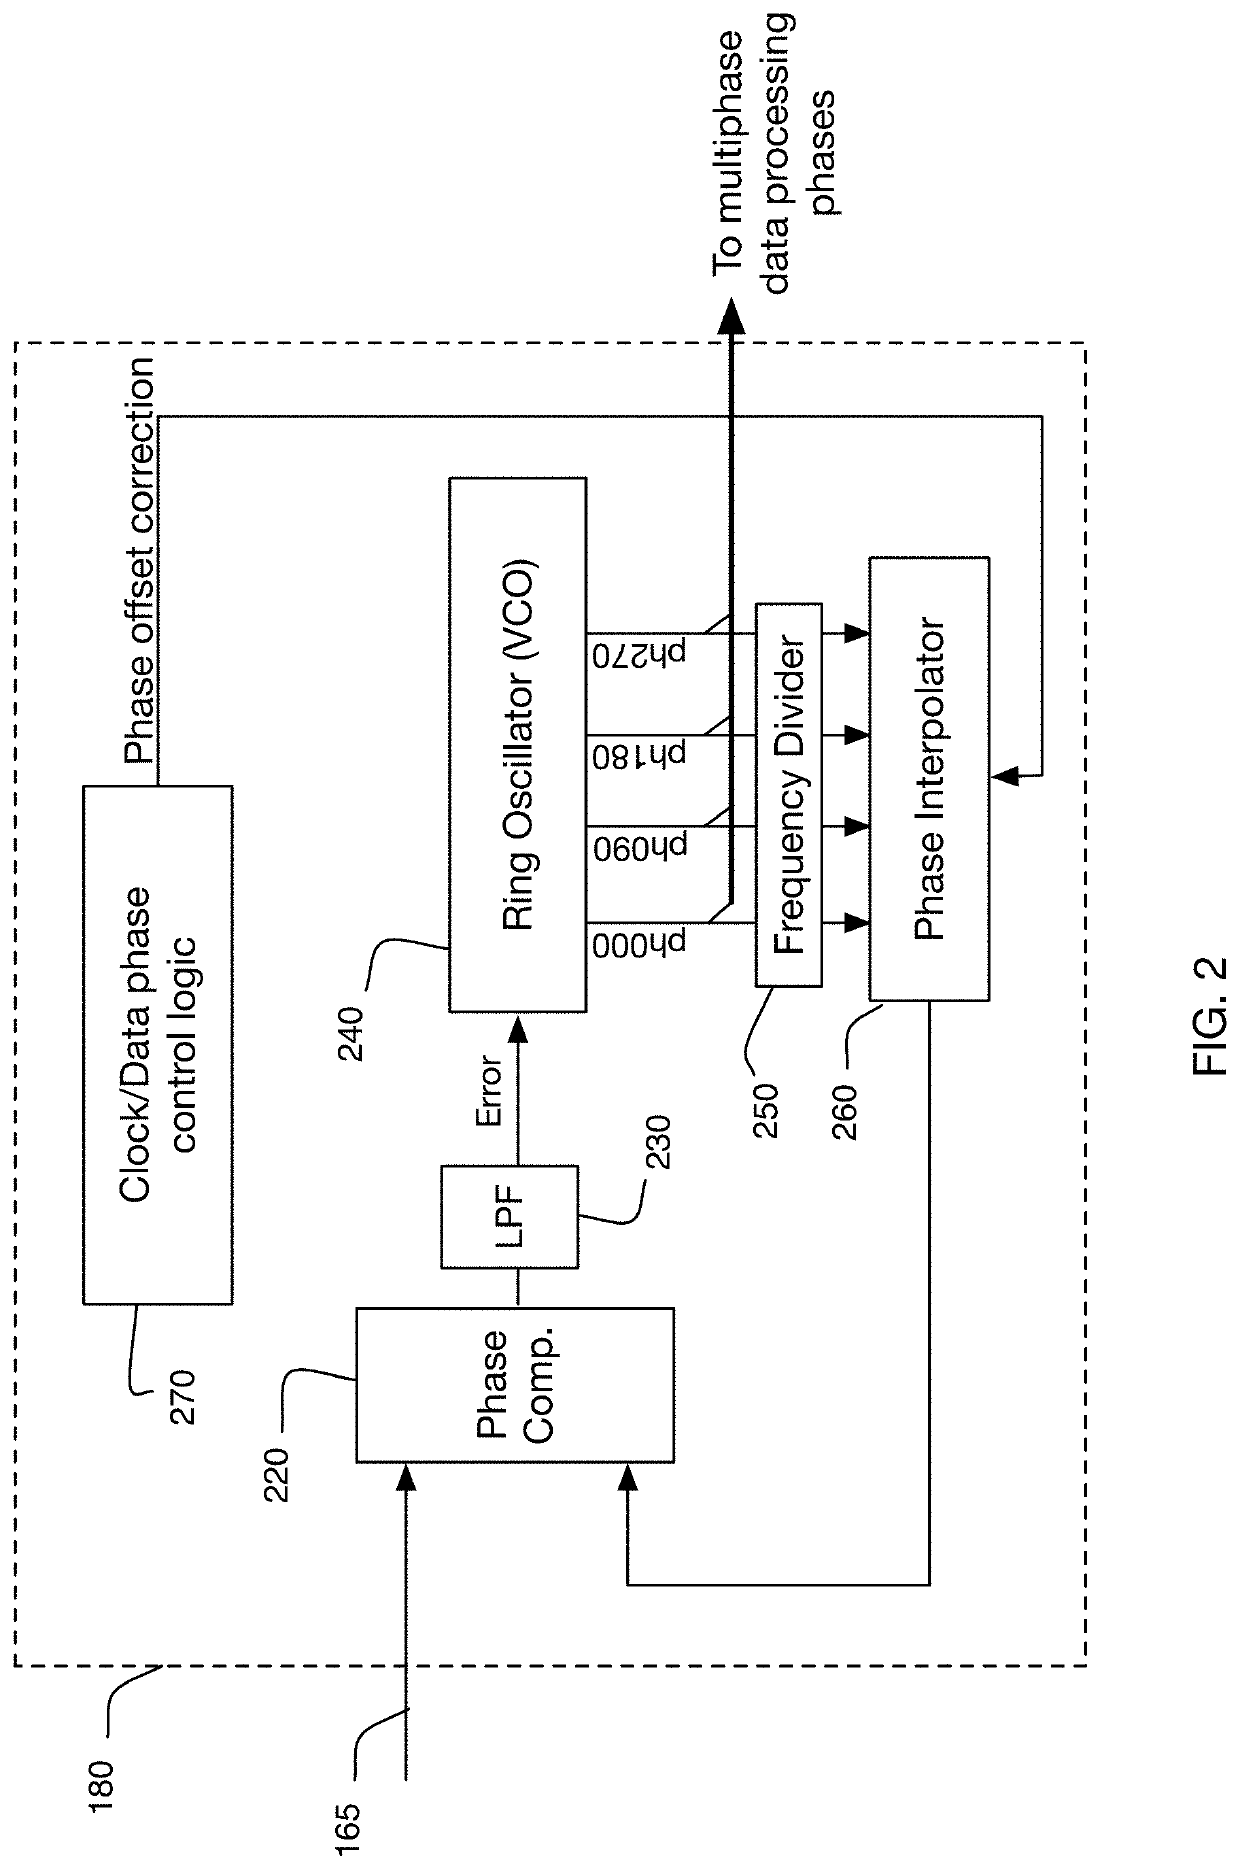 Low latency combined clock data recovery logic network and charge pump circuit